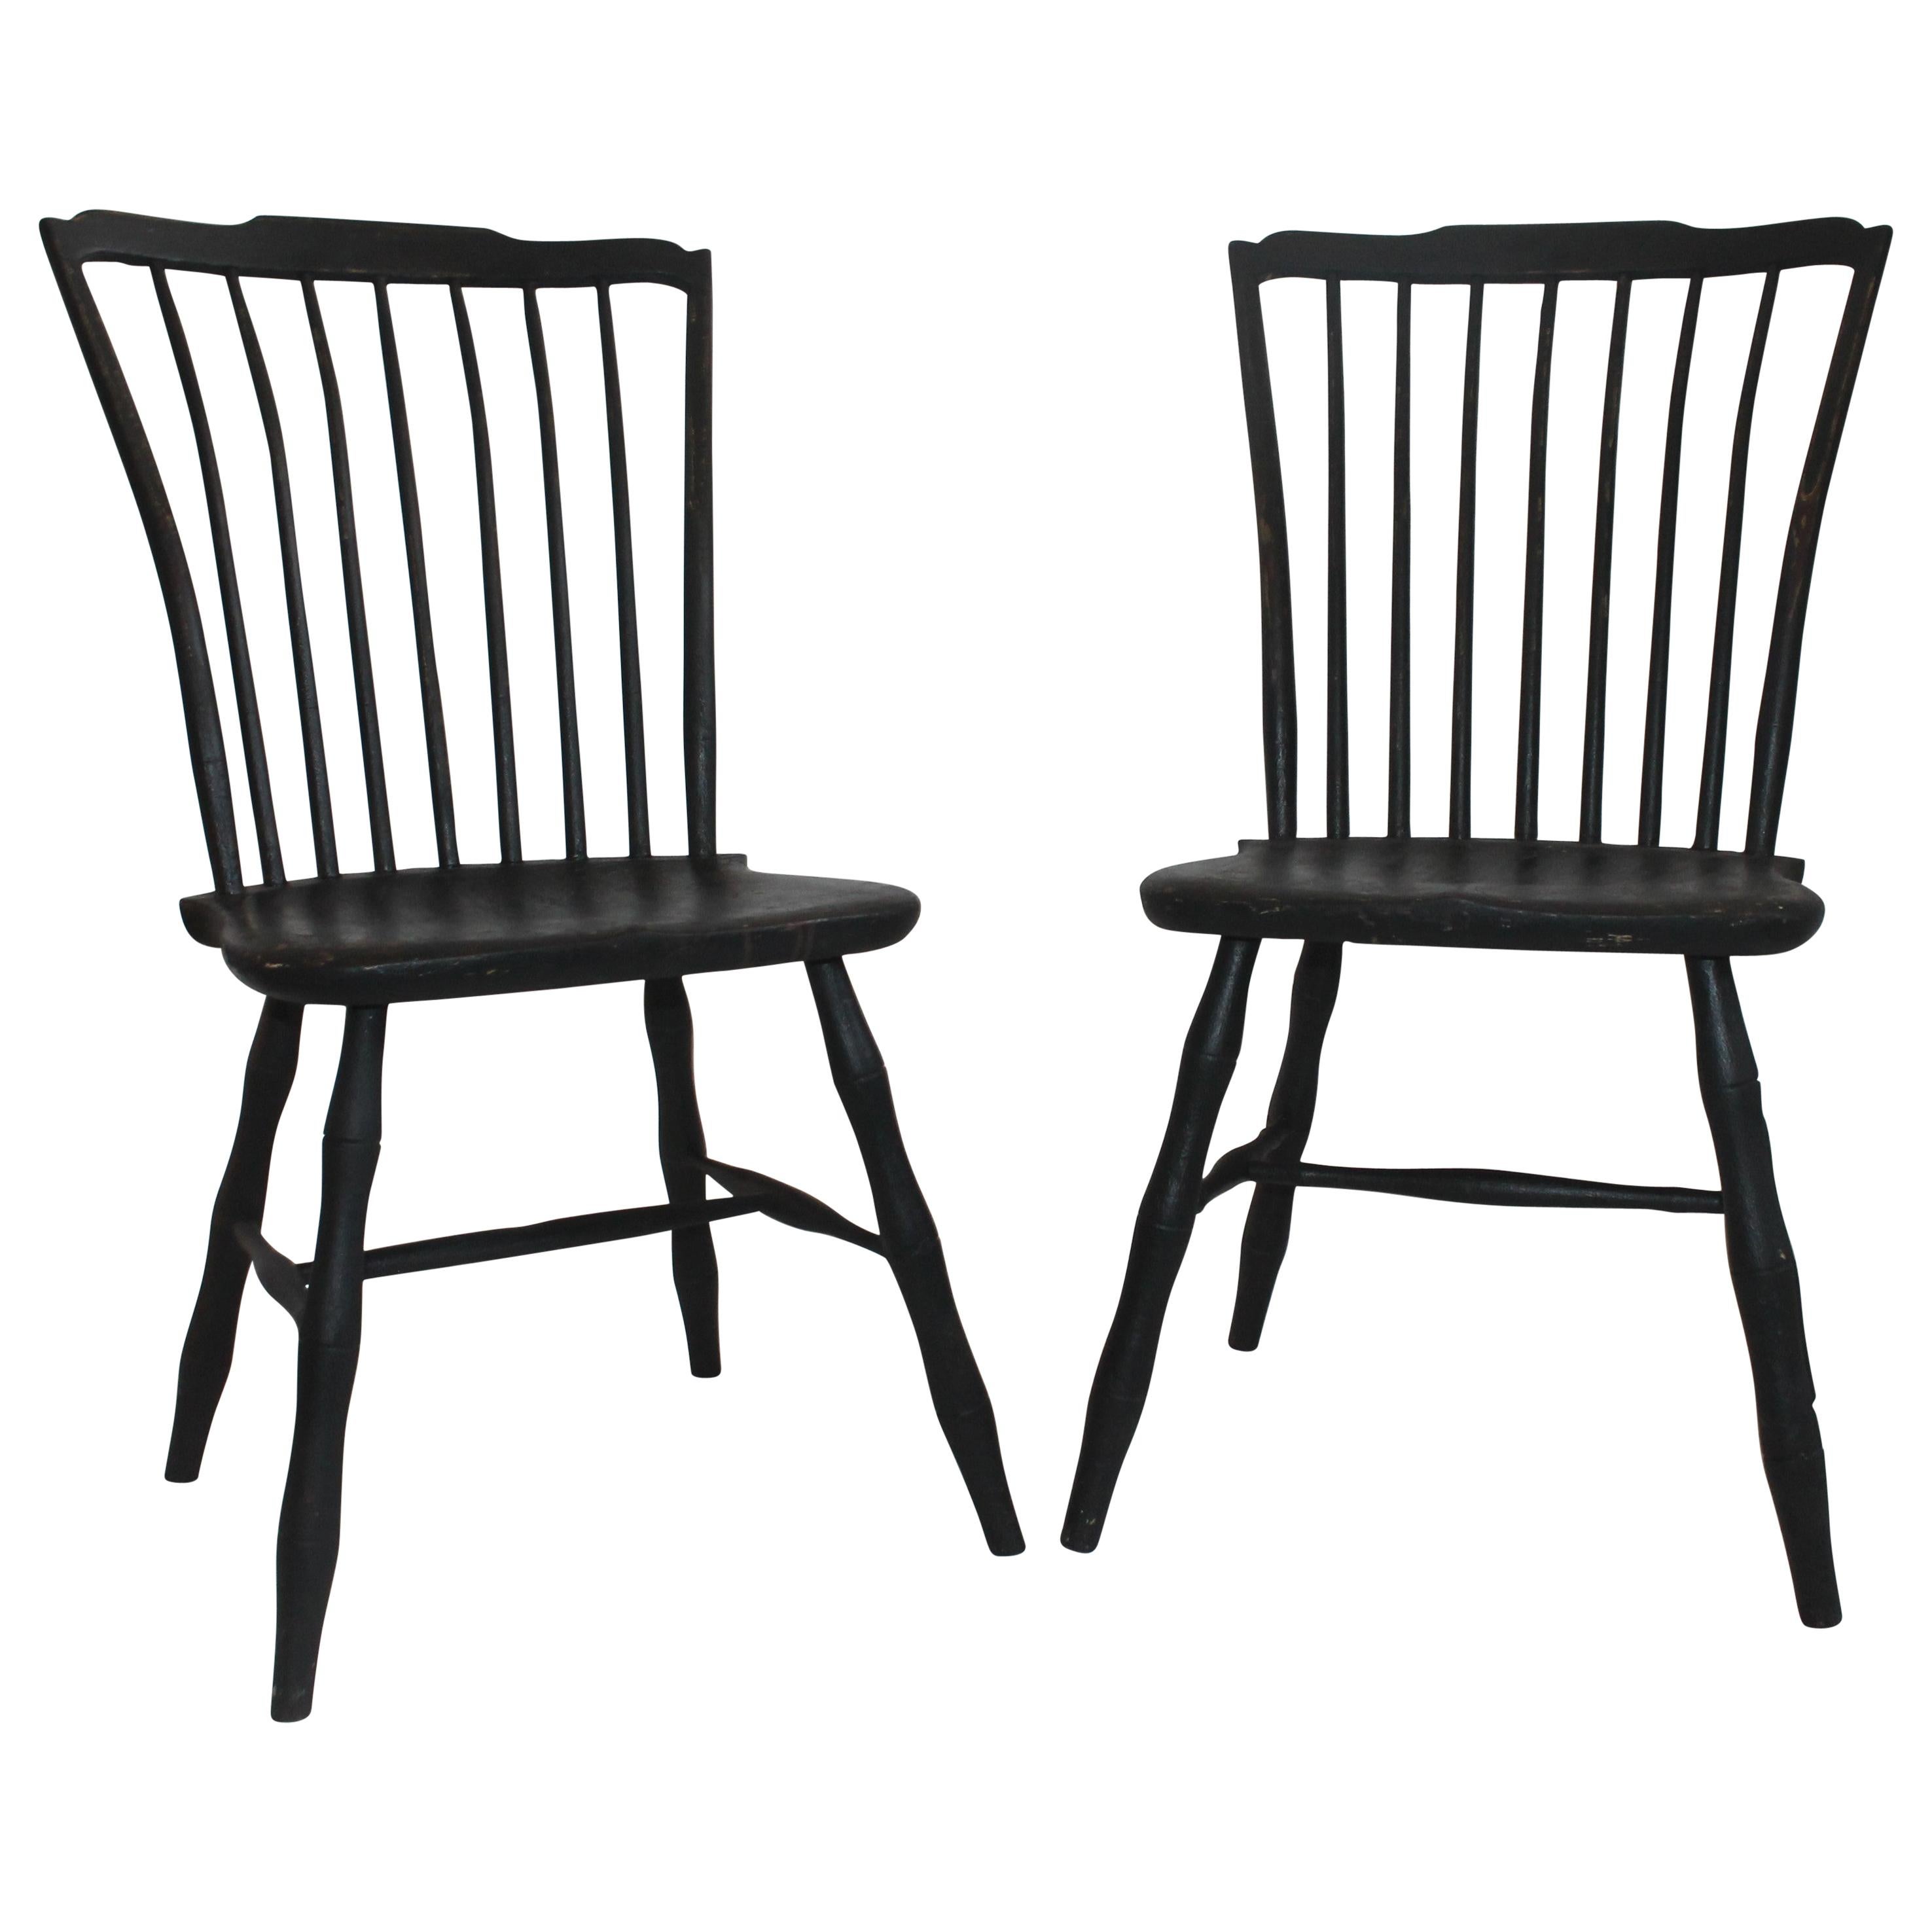 19th Century Pair of Black Painted Windsor Chairs